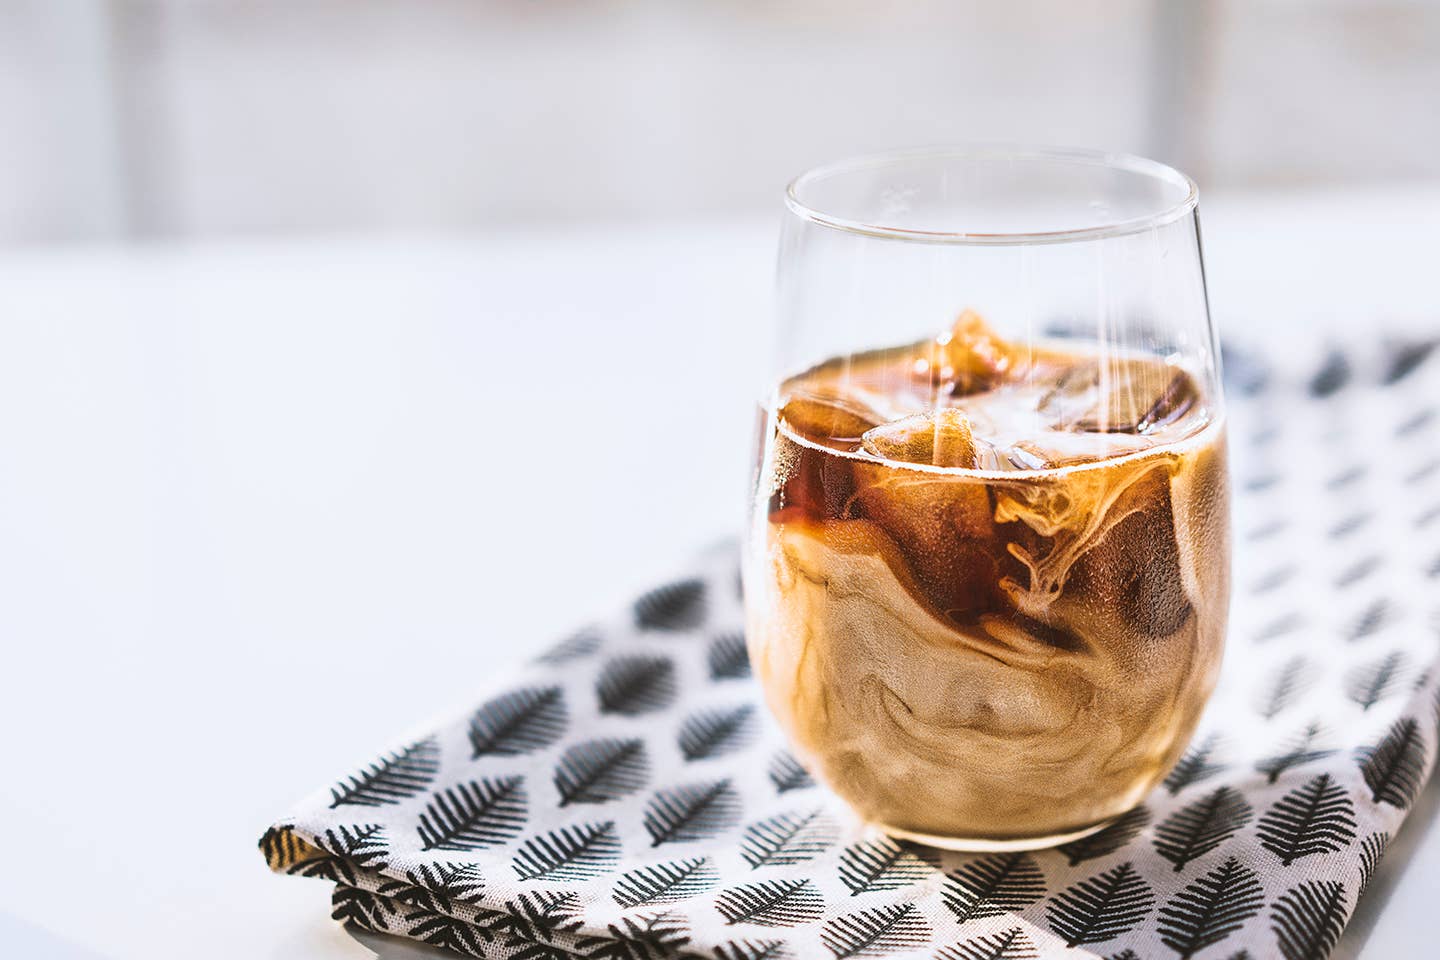 The 6 Best Cold Brew Coffee Makers of 2022